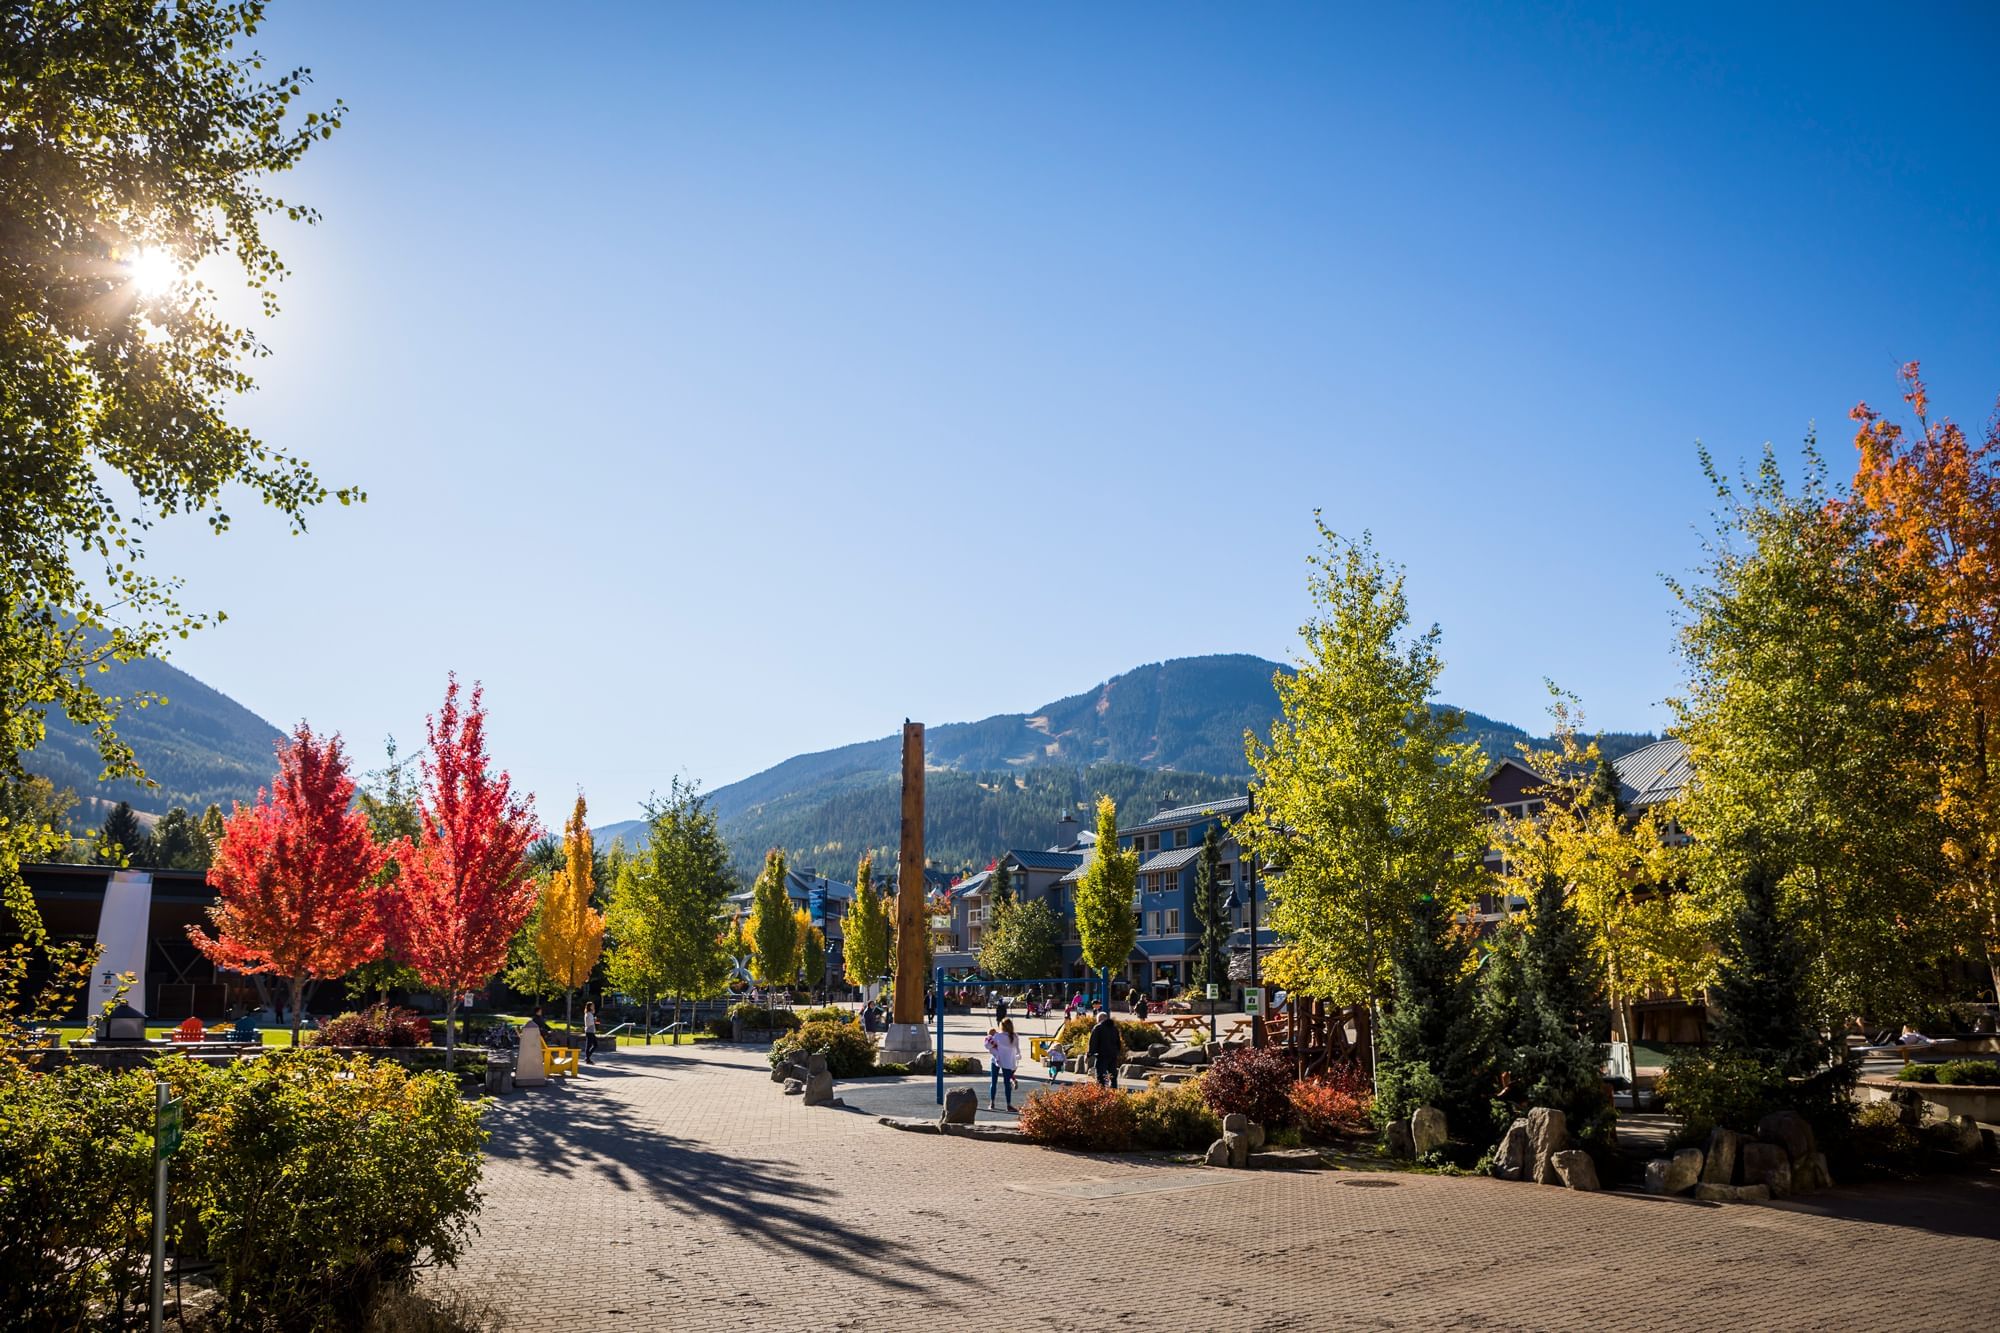 Scenic fall walkway with colorful trees in Whistler Village Stroll near Blackcomb Springs Suites